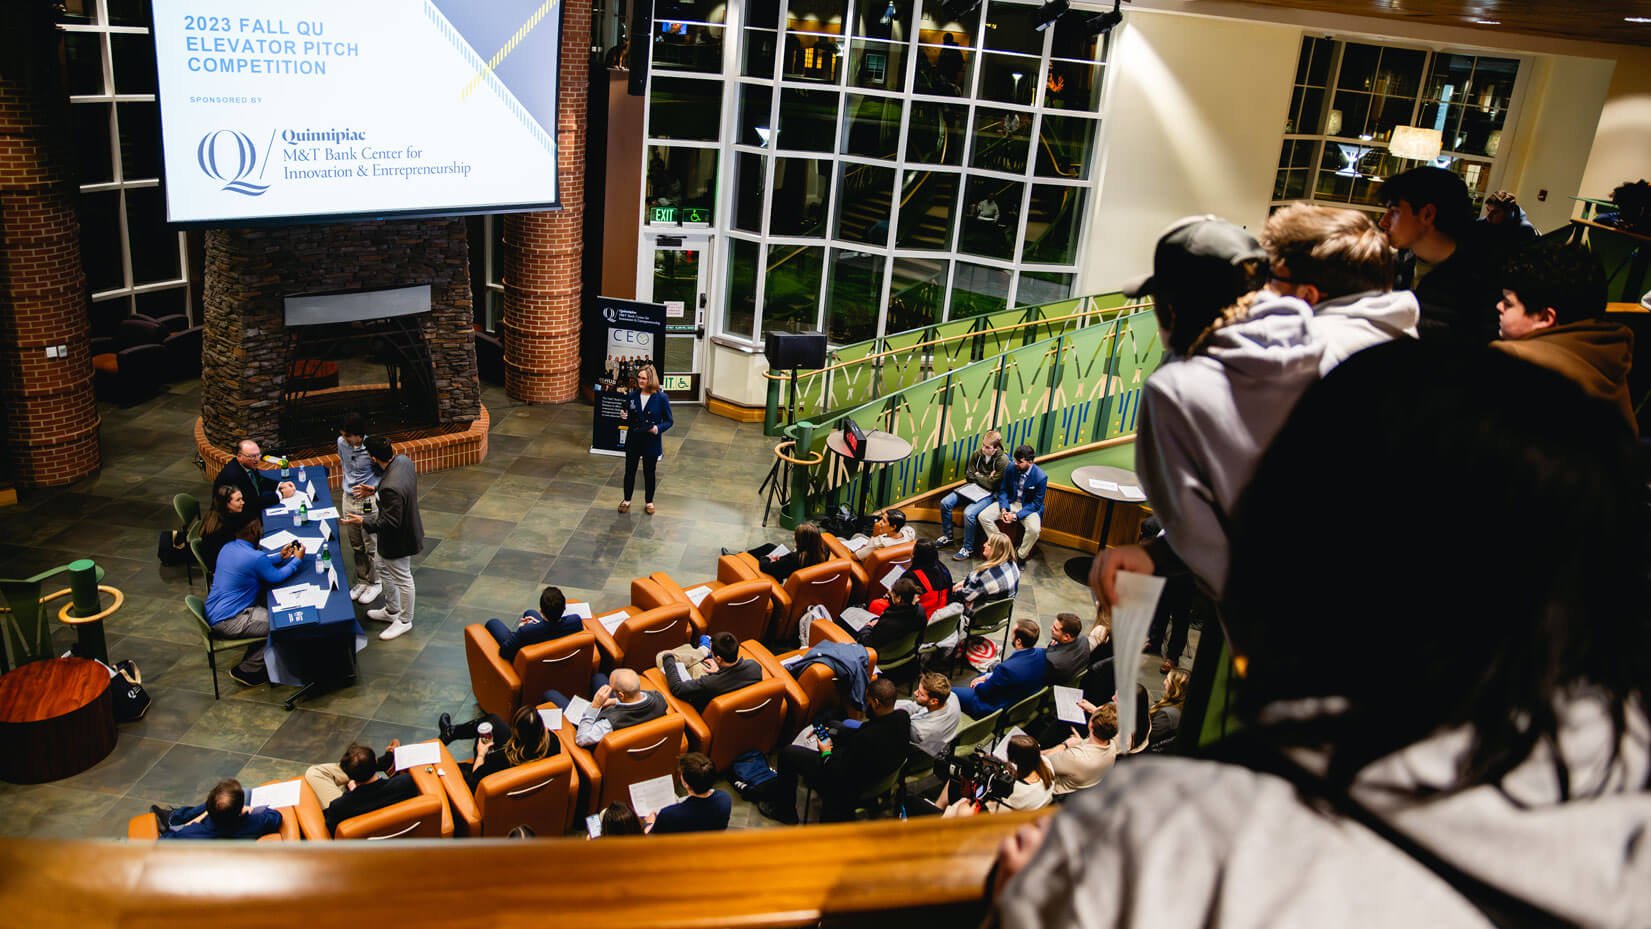 M&T Bank Center for Innovation and Entrepreneurship hosts the QU Pitch Competition,